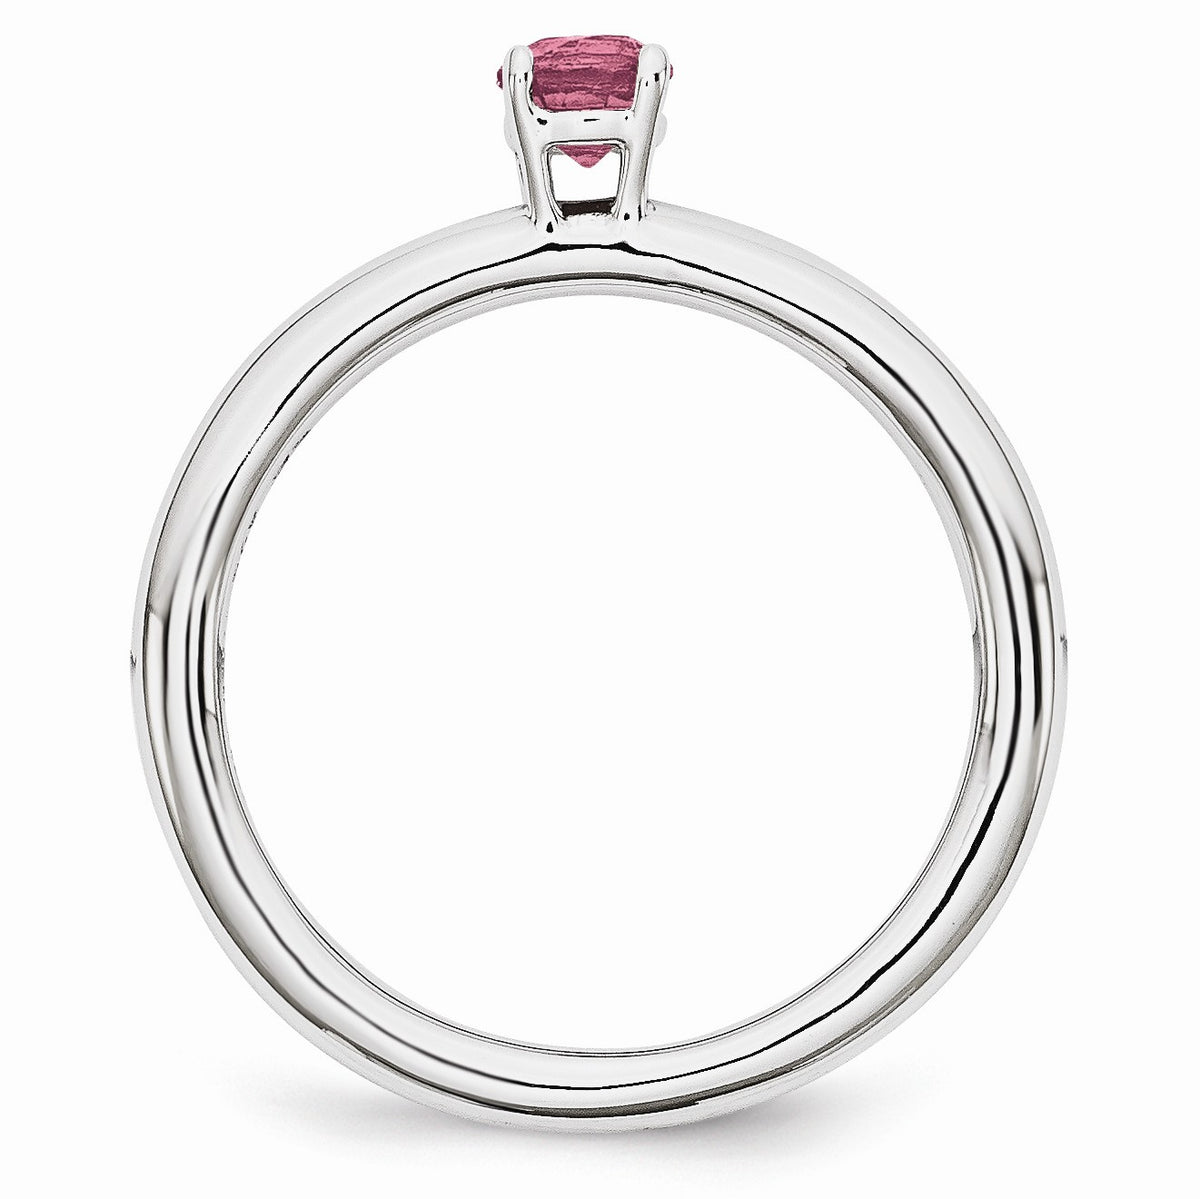 Alternate view of the Rhodium Plated Sterling Silver Stackable 4mm Pink Tourmaline Ring by The Black Bow Jewelry Co.